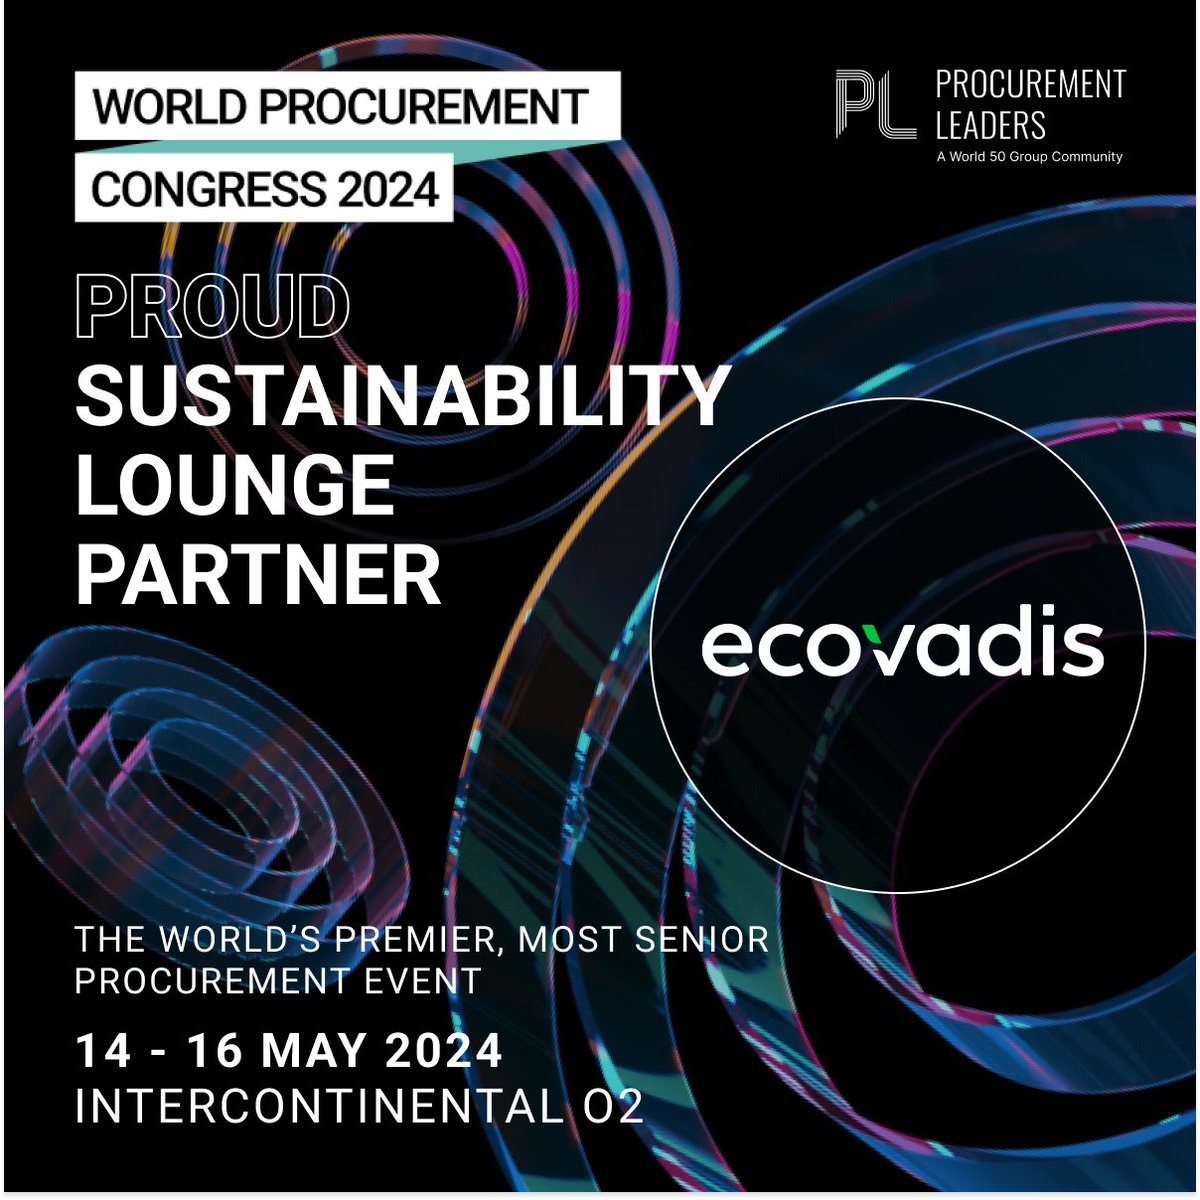 EcoVadis will be at the World Procurement Congress in London from May 15-16! As partners, we're leading the charge for sustainable procurement. Meet us at the Sustainability Lounge to discuss all things sustainable procurement. Register now 👉 ecovad.is/4dvQazR